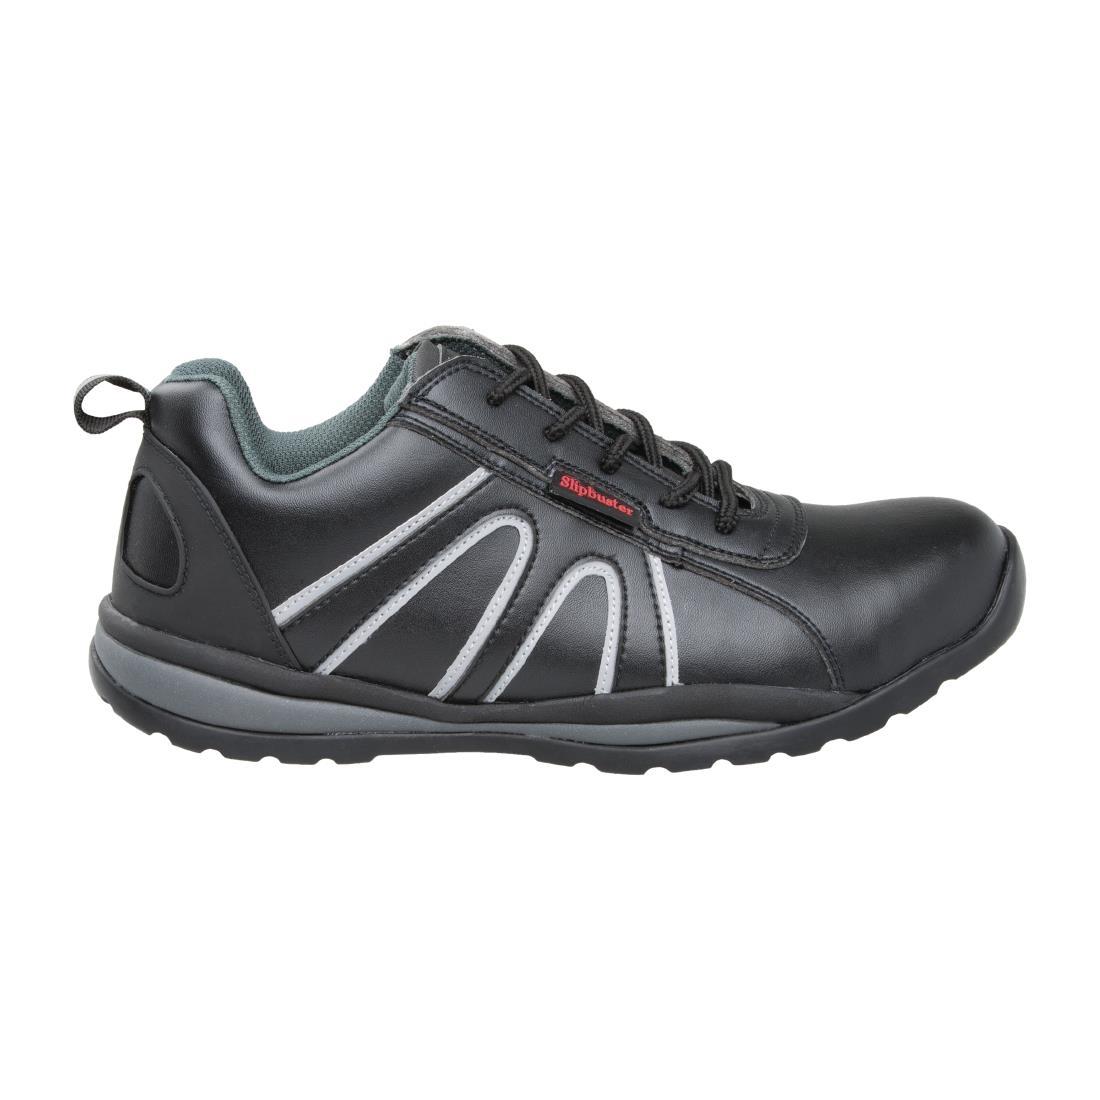 Slipbuster Safety Trainers Black 36 - A708-36  - 4